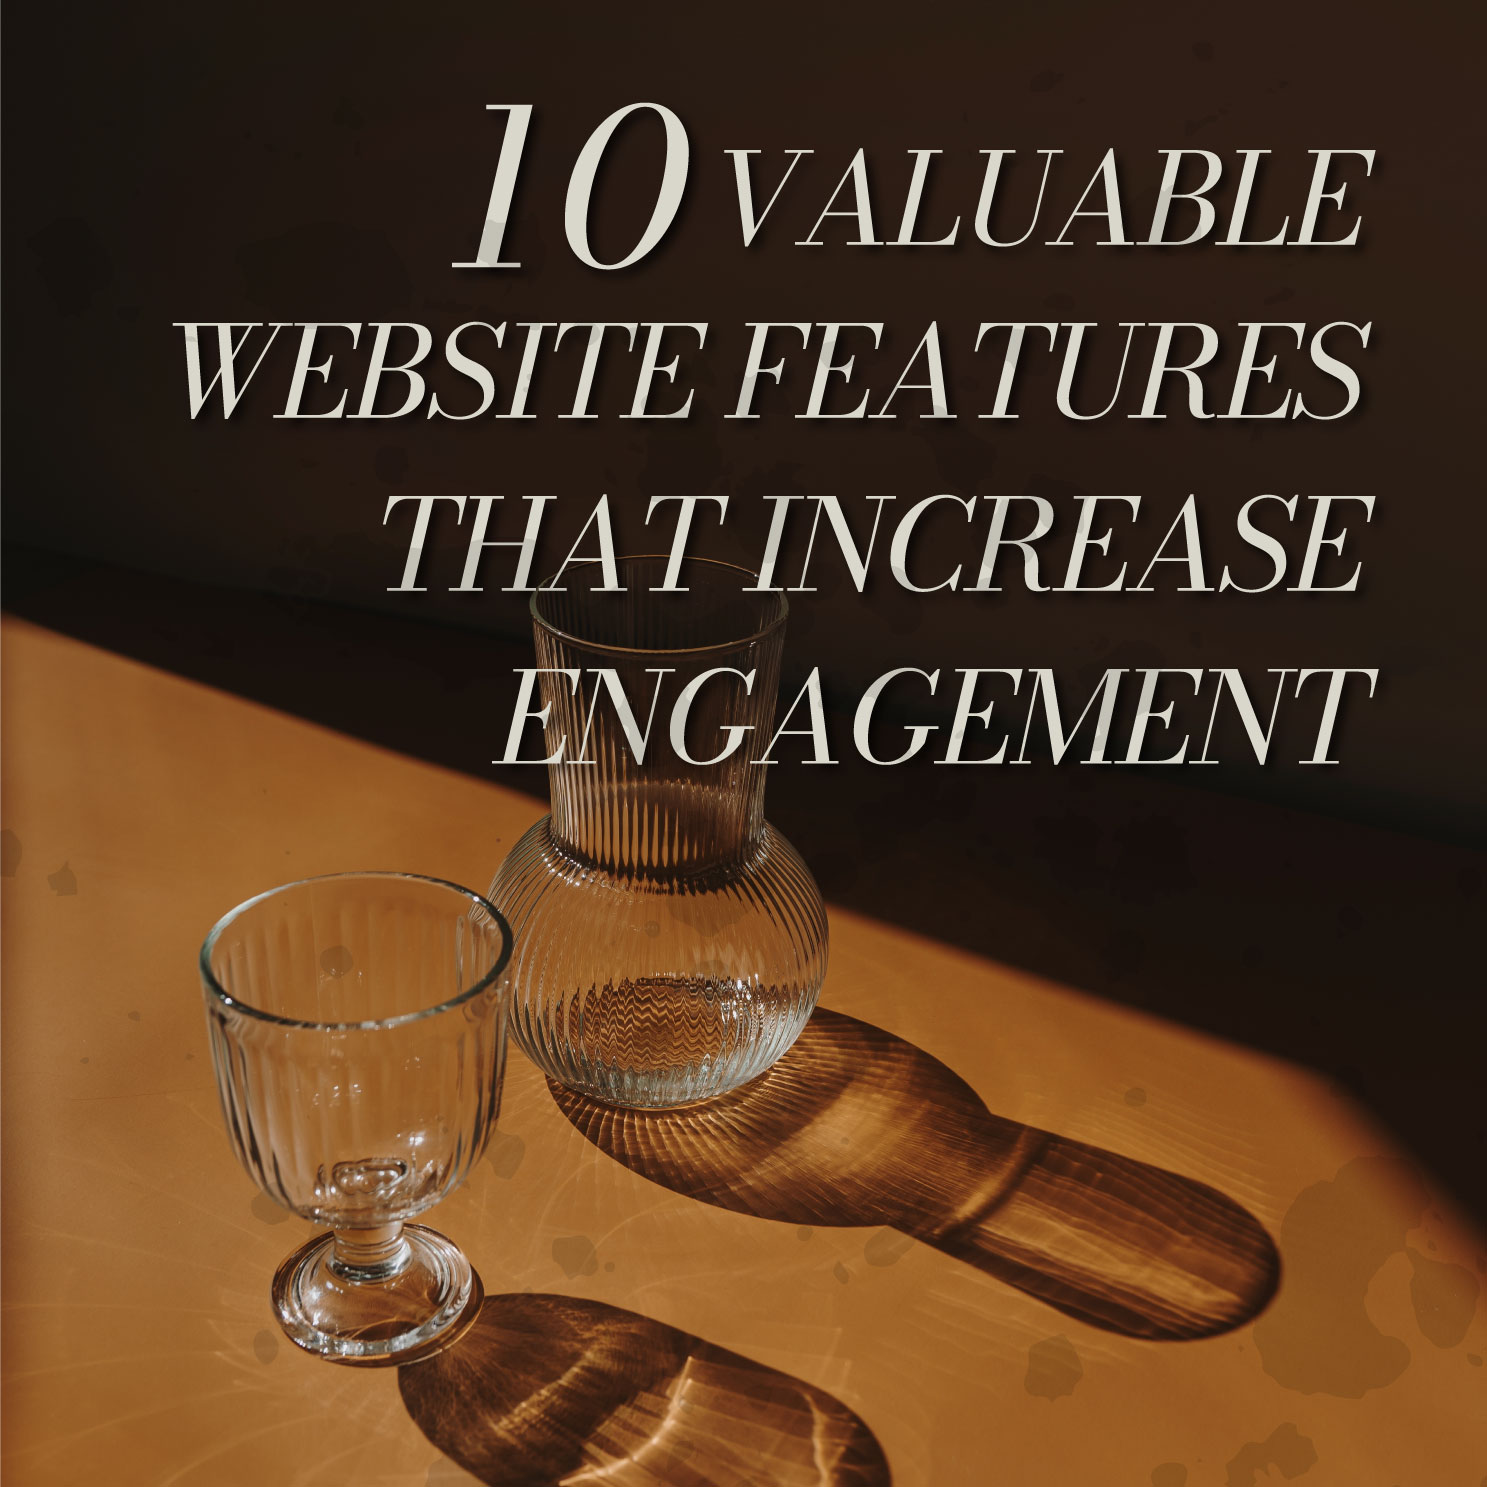 10 Valuable Website Features That Increase Engagement